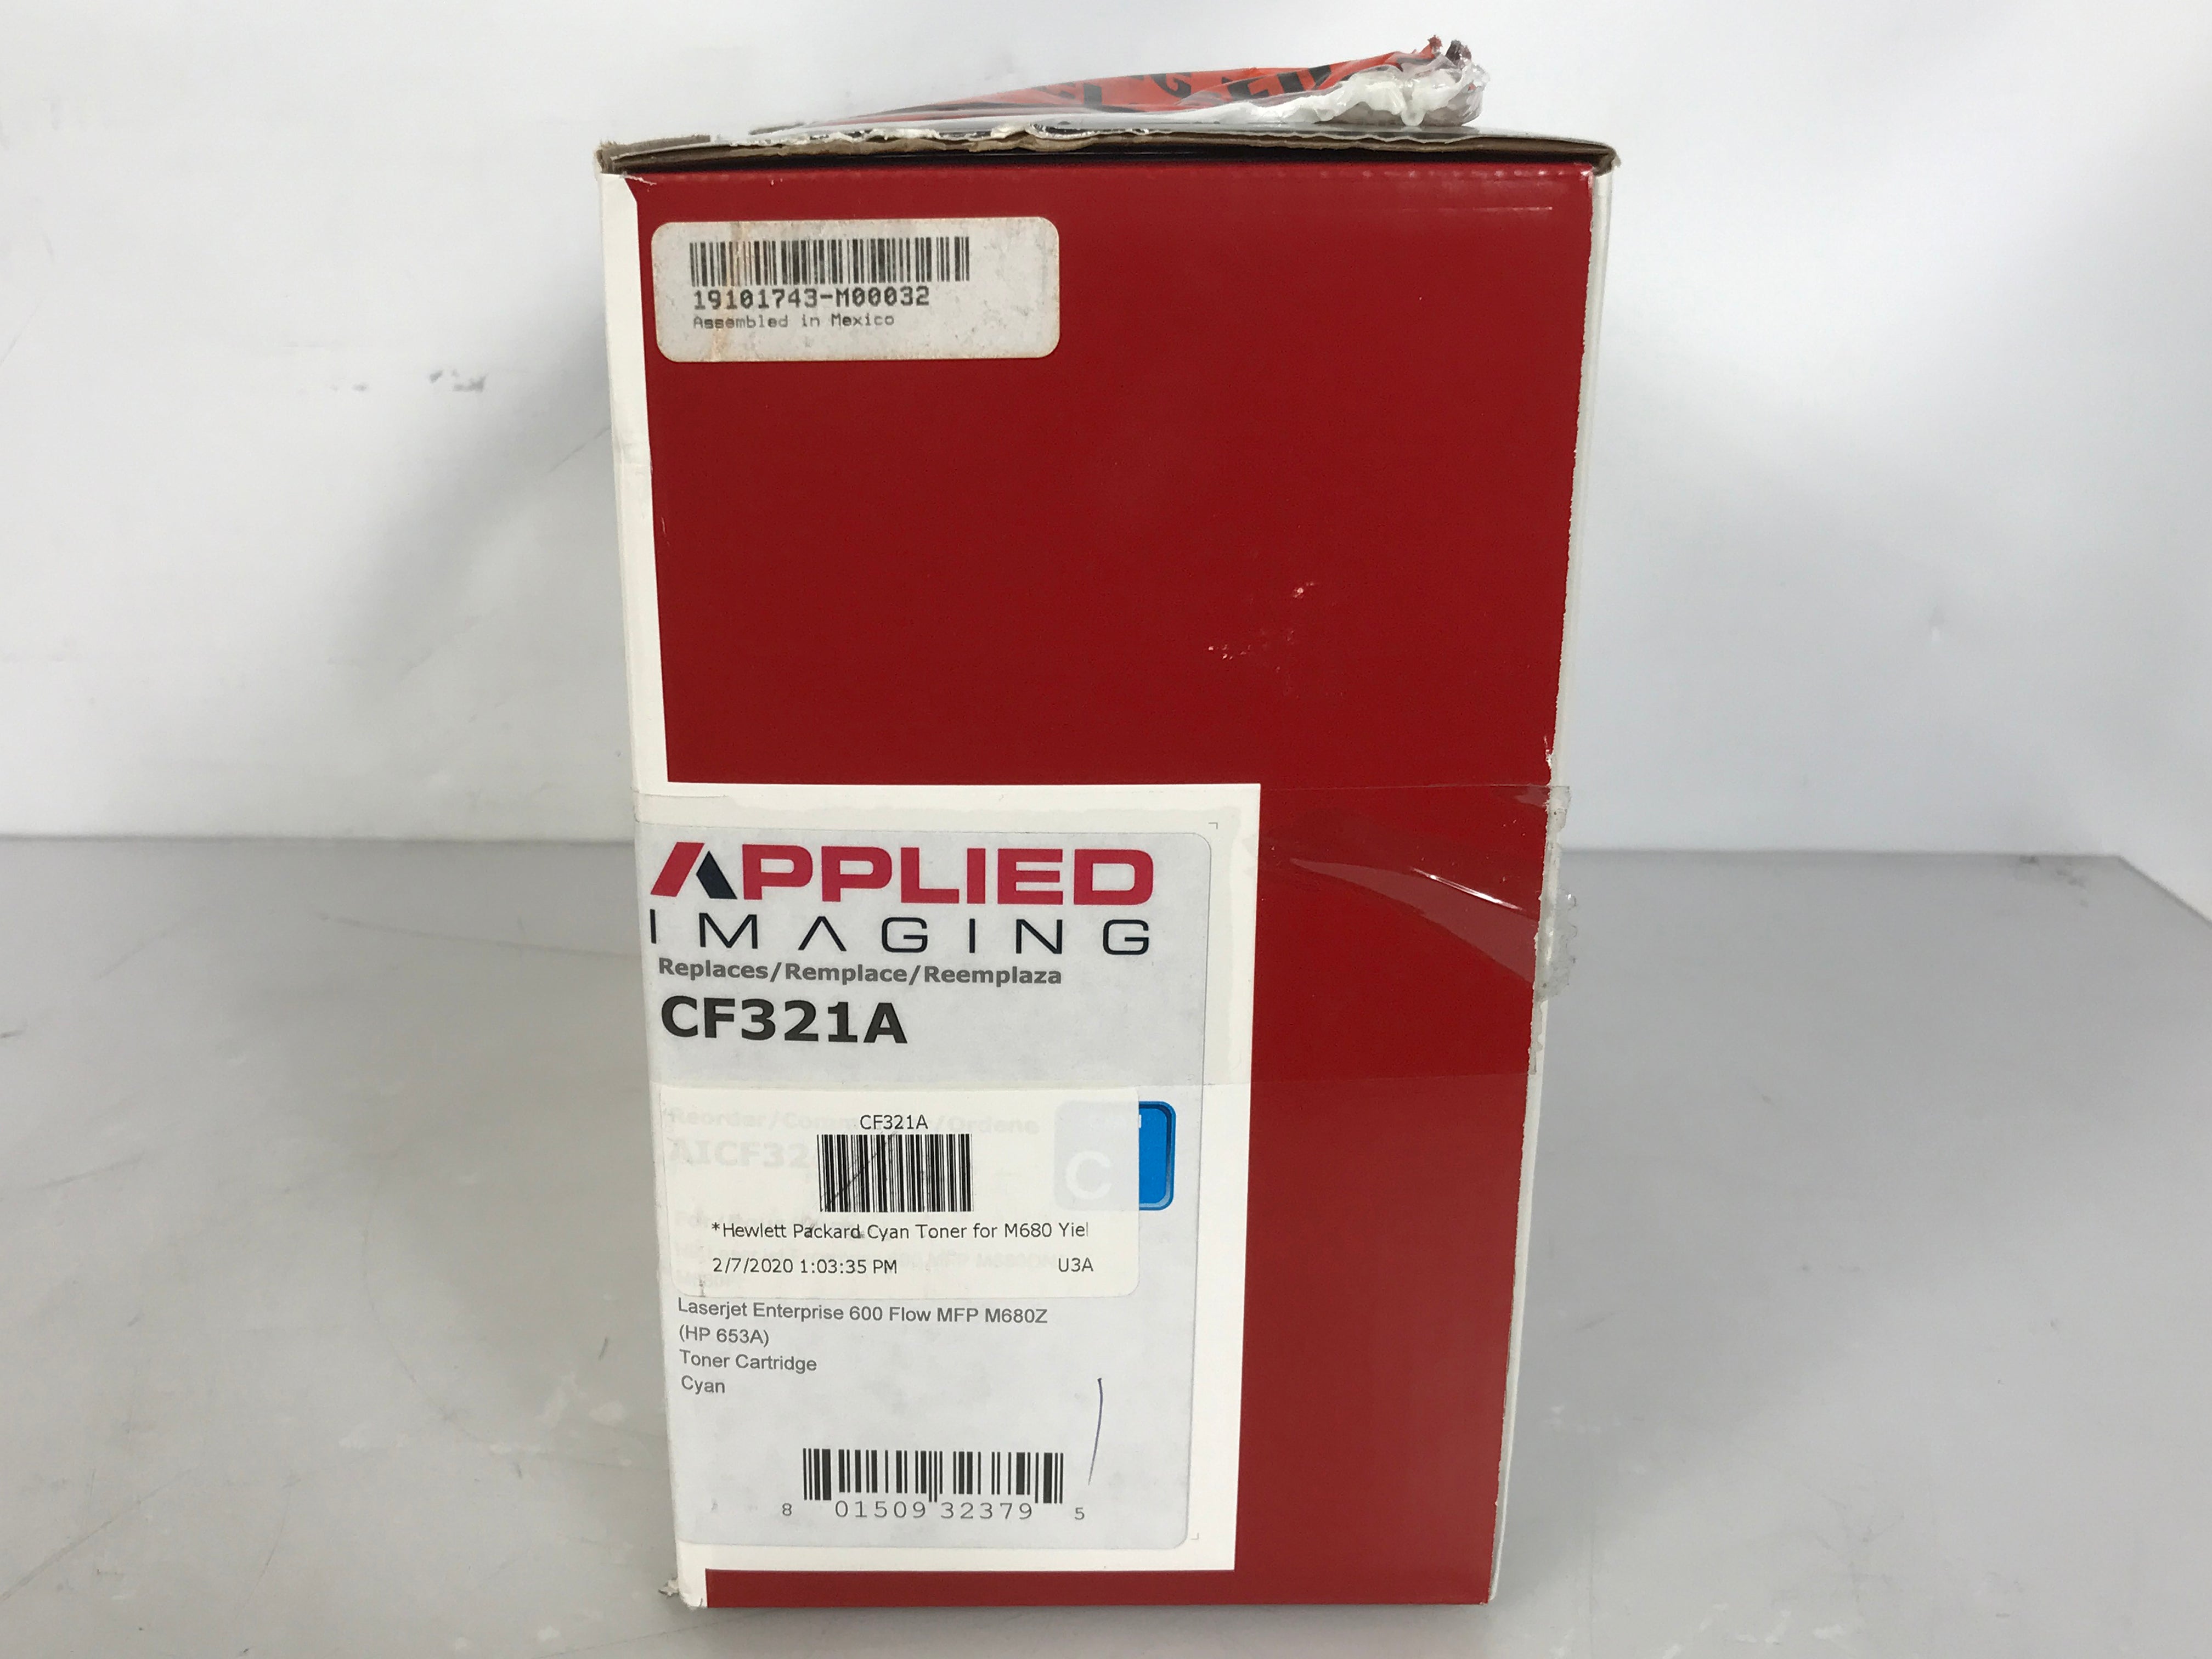 Applied Imaging AICF321A Replacement For CF321A Cyan Toner Cartridge